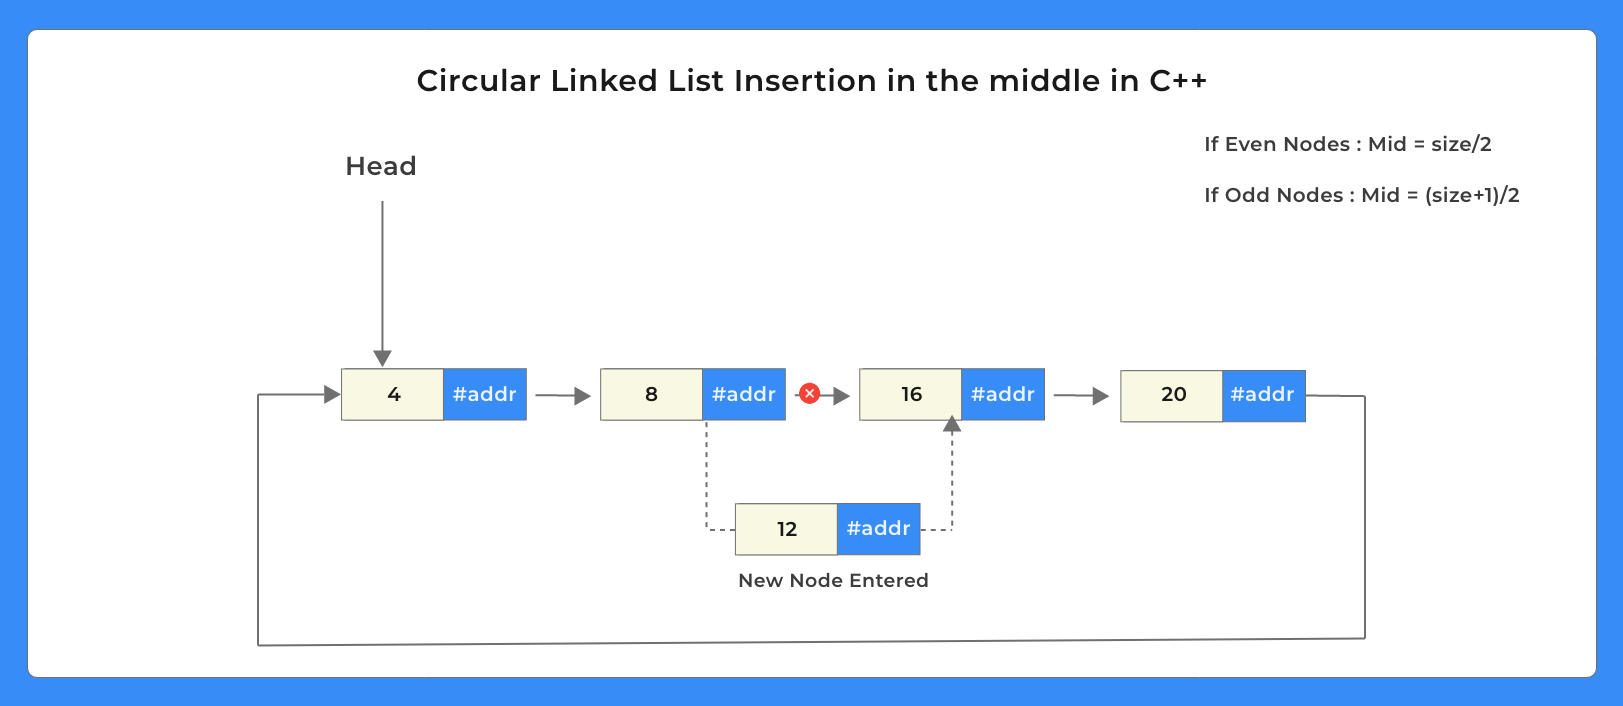 Circular Linked List Insertion in the middle in C++